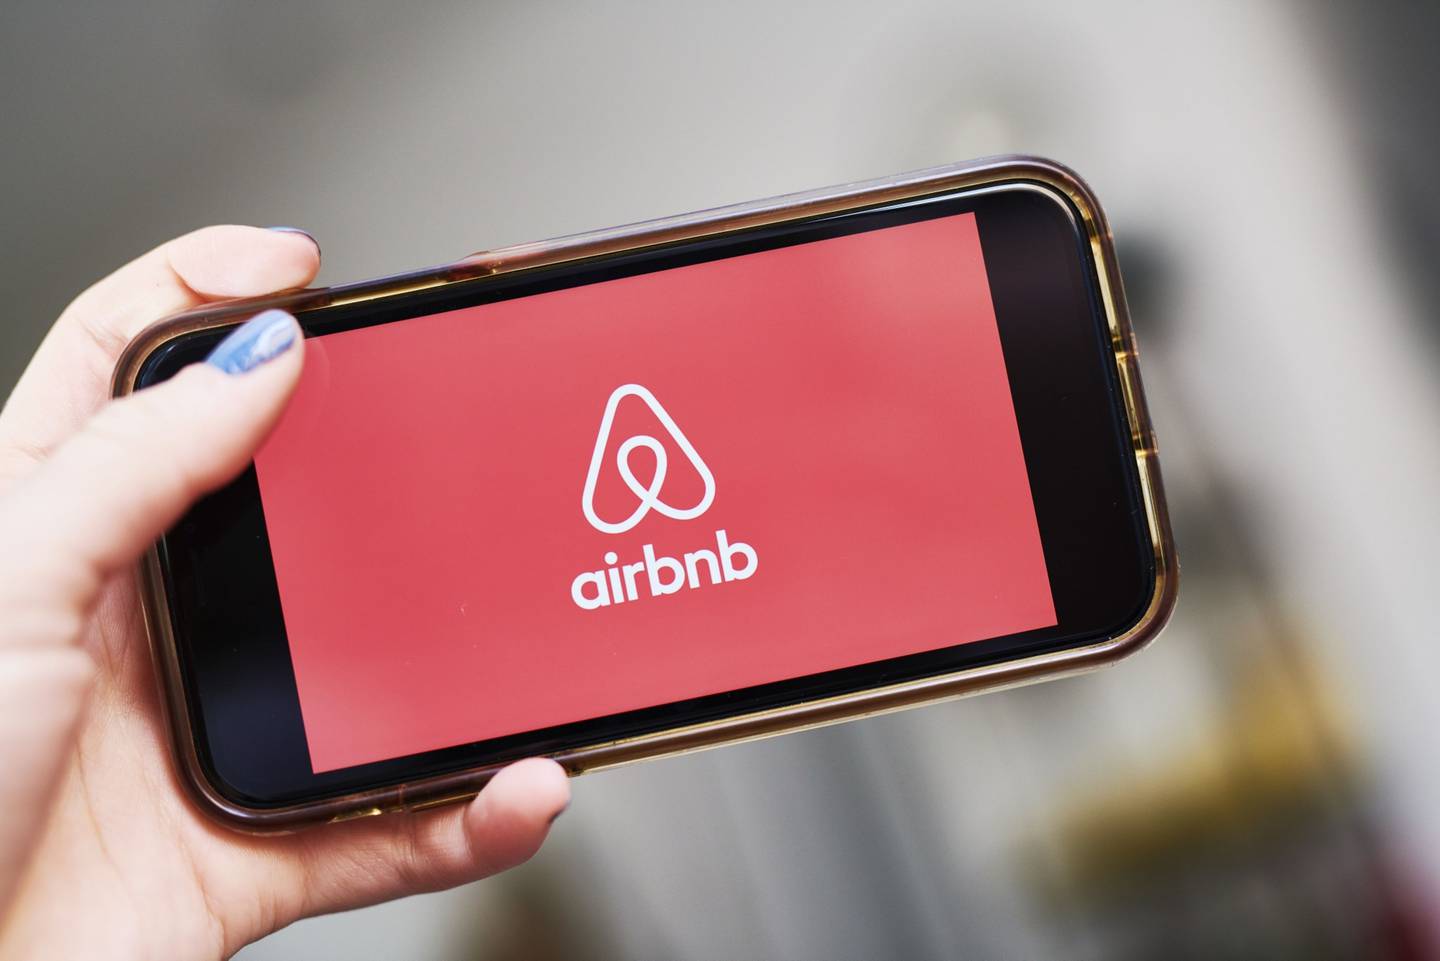 Latin America is a big deal for Airbnb, especially Brazil, the company's co-founder told Bloomberg Línea.